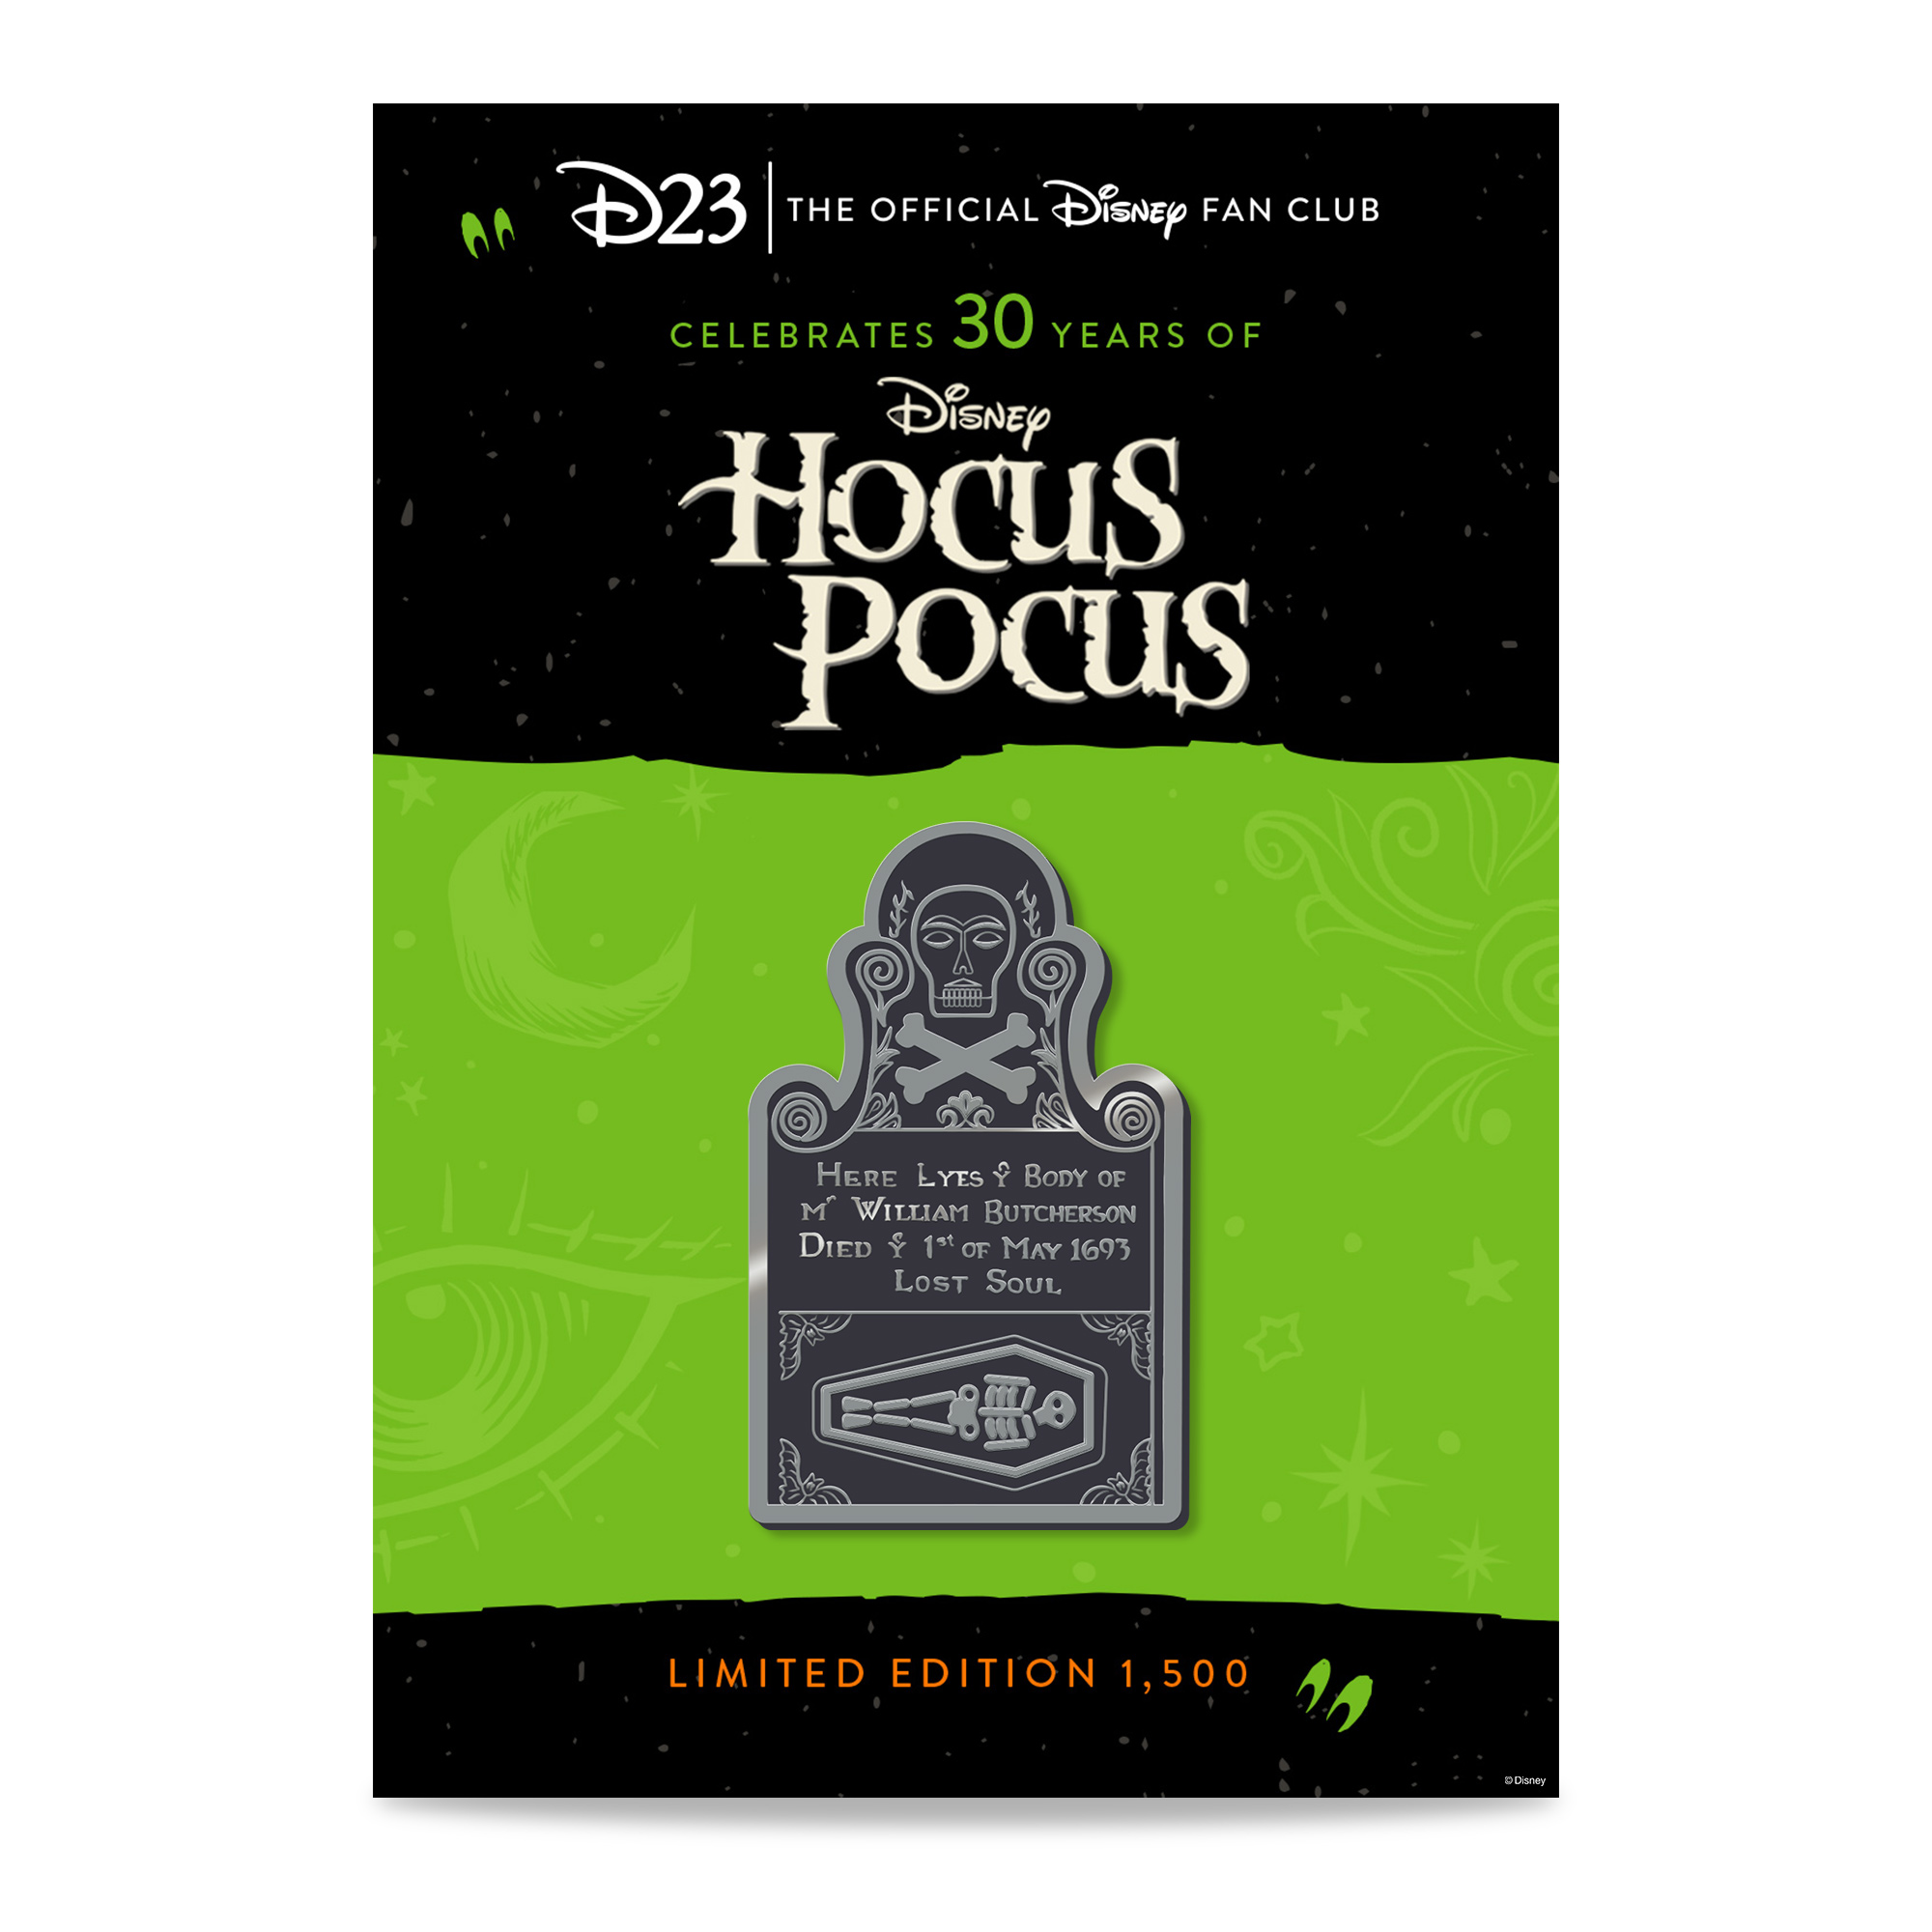 Artwork featuring D23-exclusive the Hocus Pocus 30th Anniversary pin. The artwork of the pin is black with silver elements inspired by Billy Butcherson’s gravestone. The pin itself is set on a backer card with green and black Halloween designs.